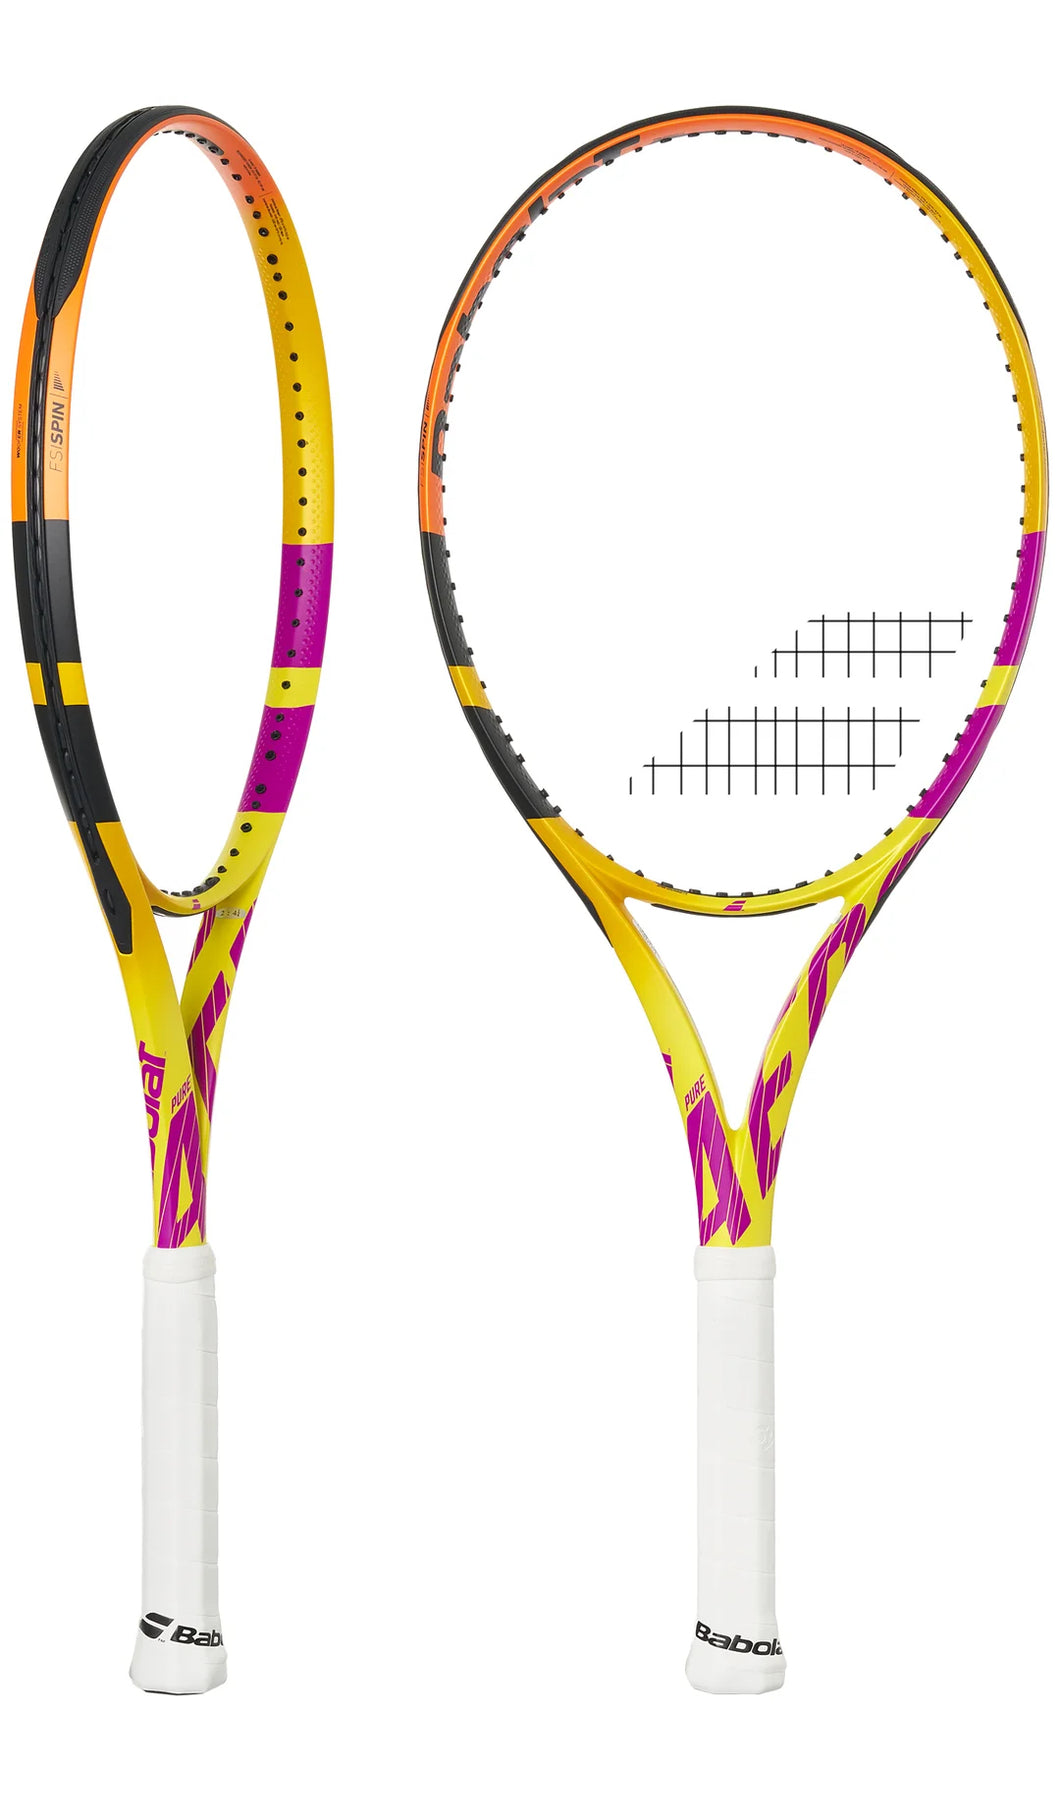 Introducing a special cosmetic version of the Pure Aero Lite. Inspired by Rafael Nadal, the Pure Aero Rafa Lite is ideal for the rising intermediate player who wants a lightning fast racquet with surgical targeting on full swings. 